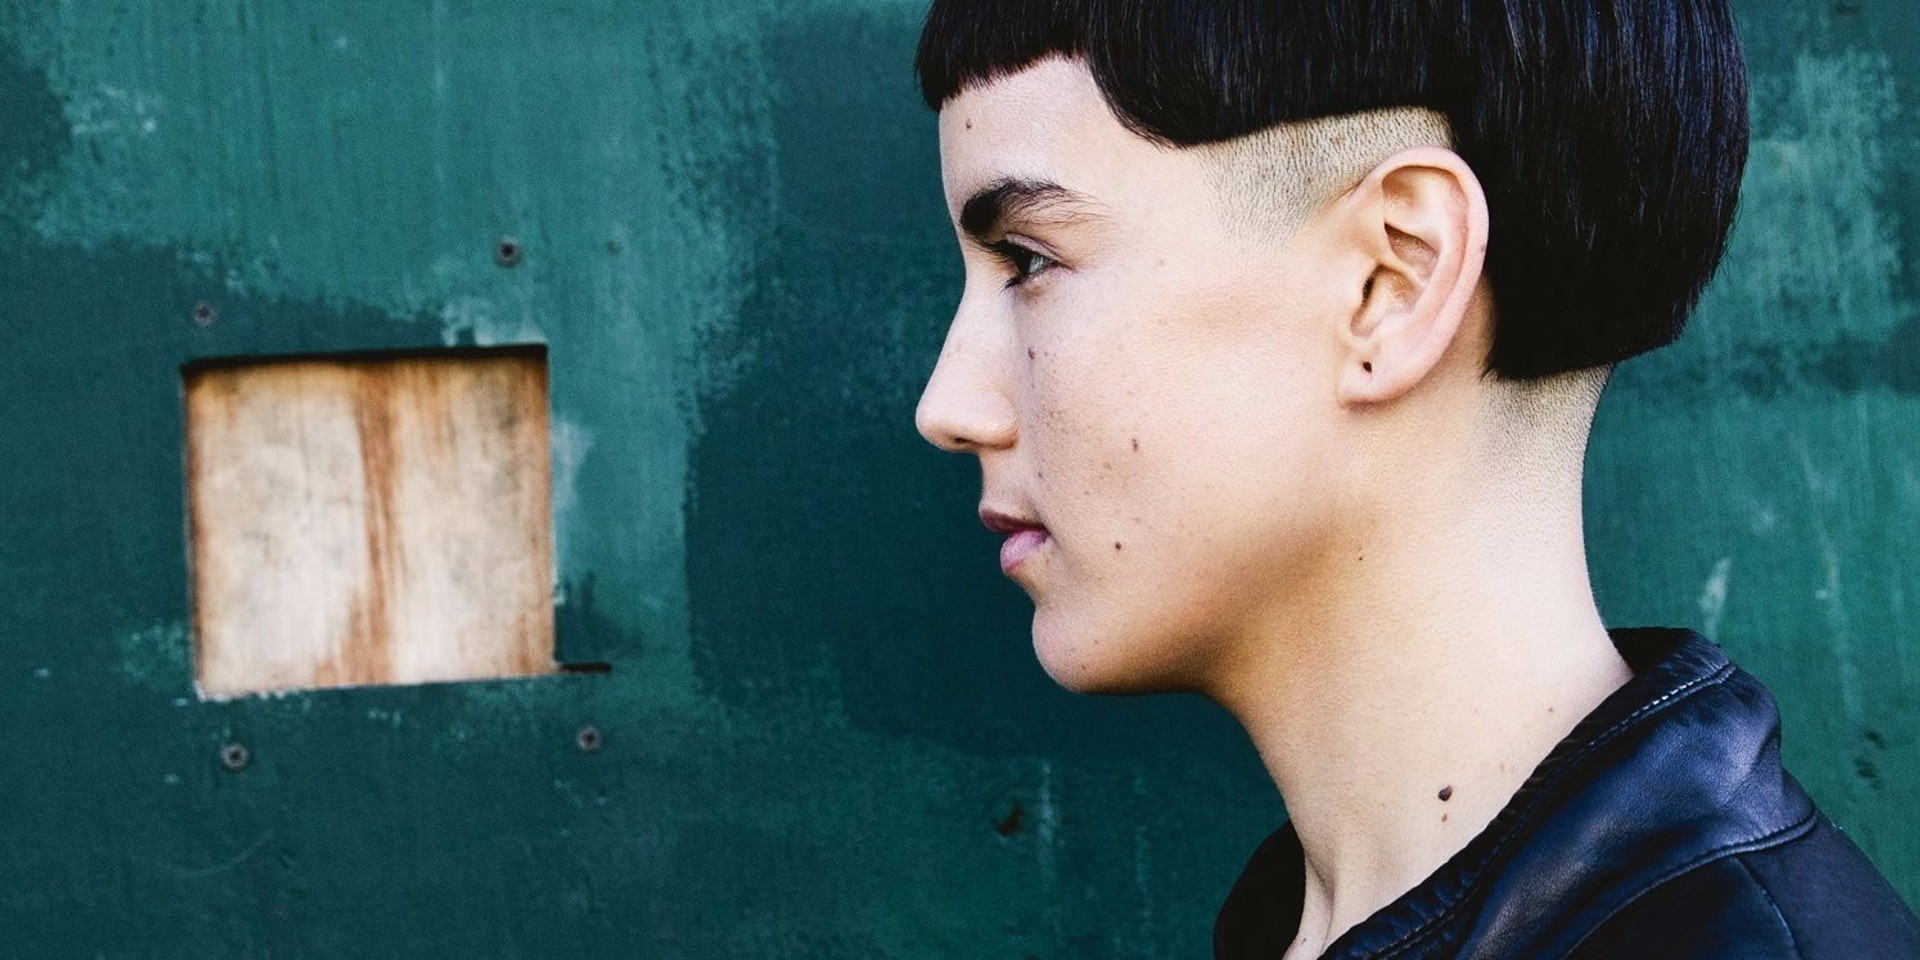 Kim Ann Foxman on returning to her rave roots, teases a secret new band project in 2017